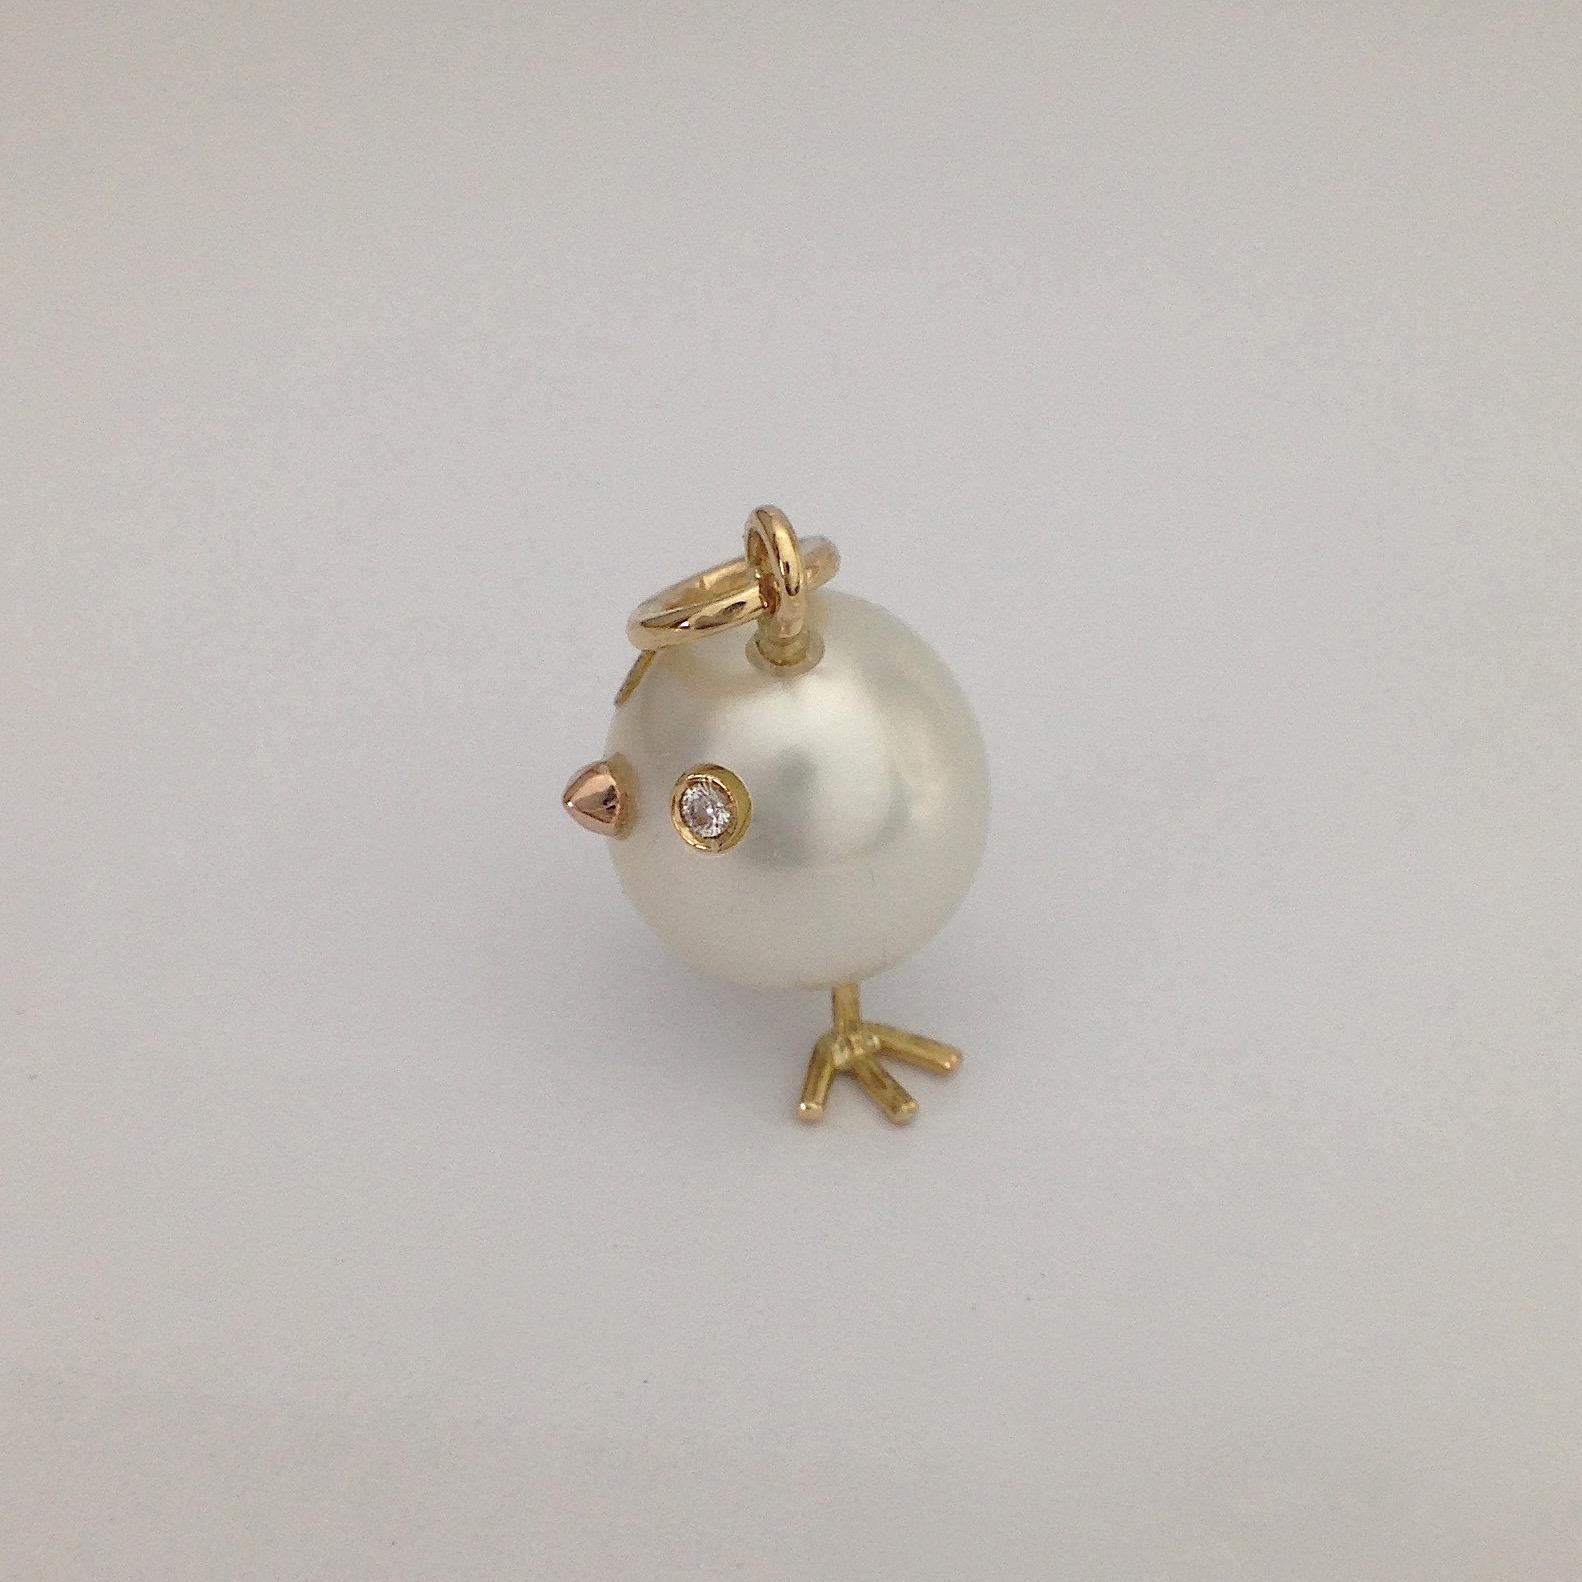 An Australian pearl has been carefully crafted to make a chick. He has his two legs, two eyes encrusted with two white diamonds and his beak. 
The gold is red for the beak, for the other elements it's yellow.
The caliber is ct 0.02
The chain is not